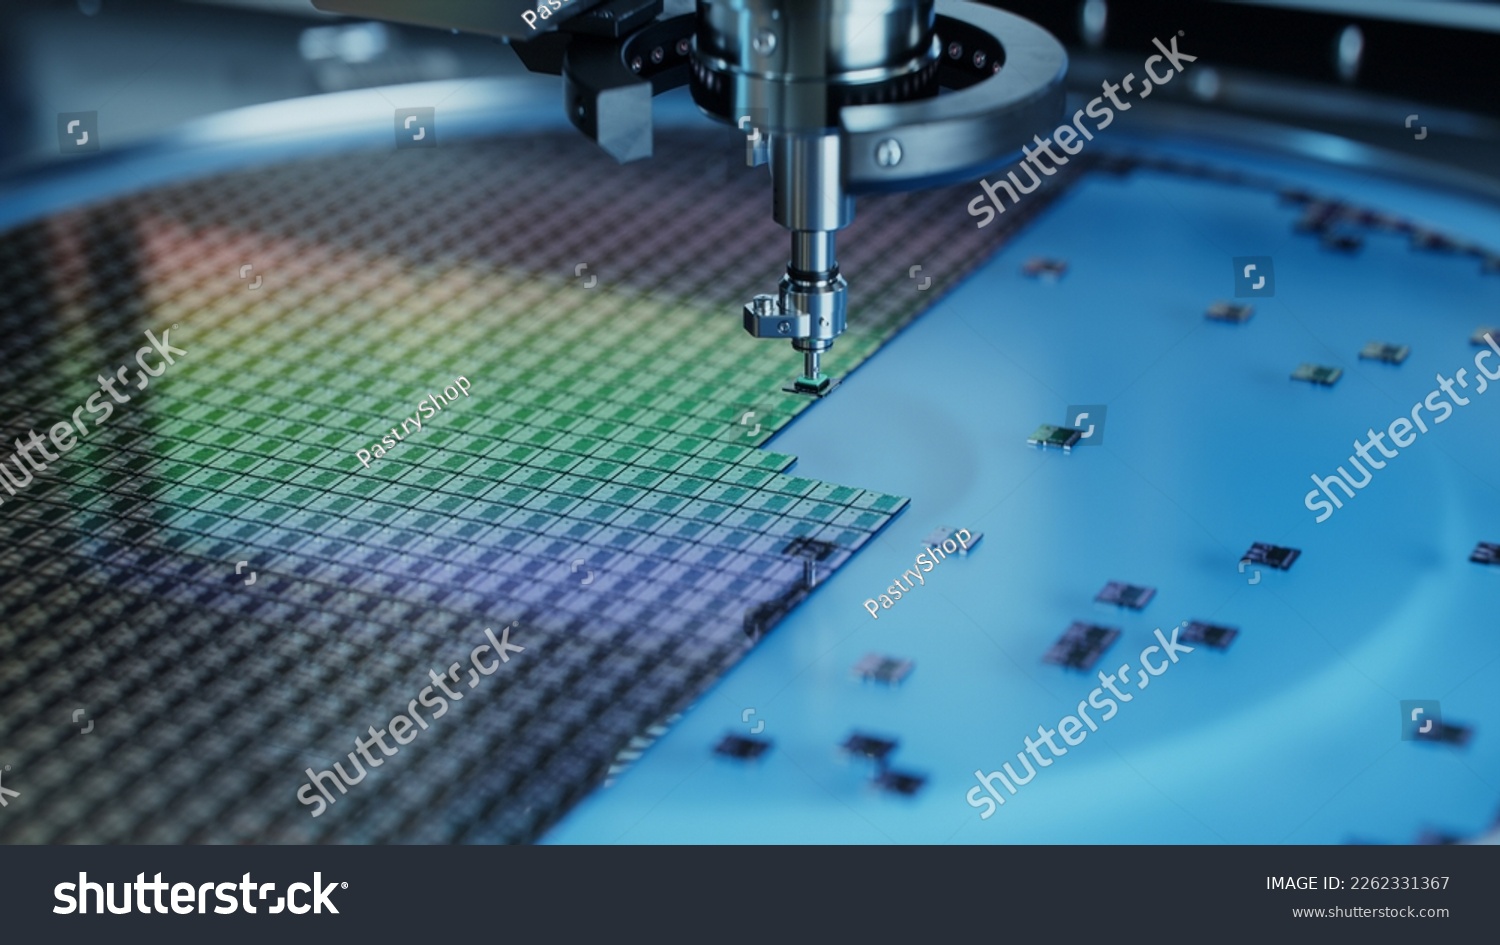 Silicon Dies are being Extracted by a Pick and Place Machine from Wafer and Attached to Substrate. Computer Chip Manufacturing at Factory. Close-up of Semiconductor Packaging Process. #2262331367